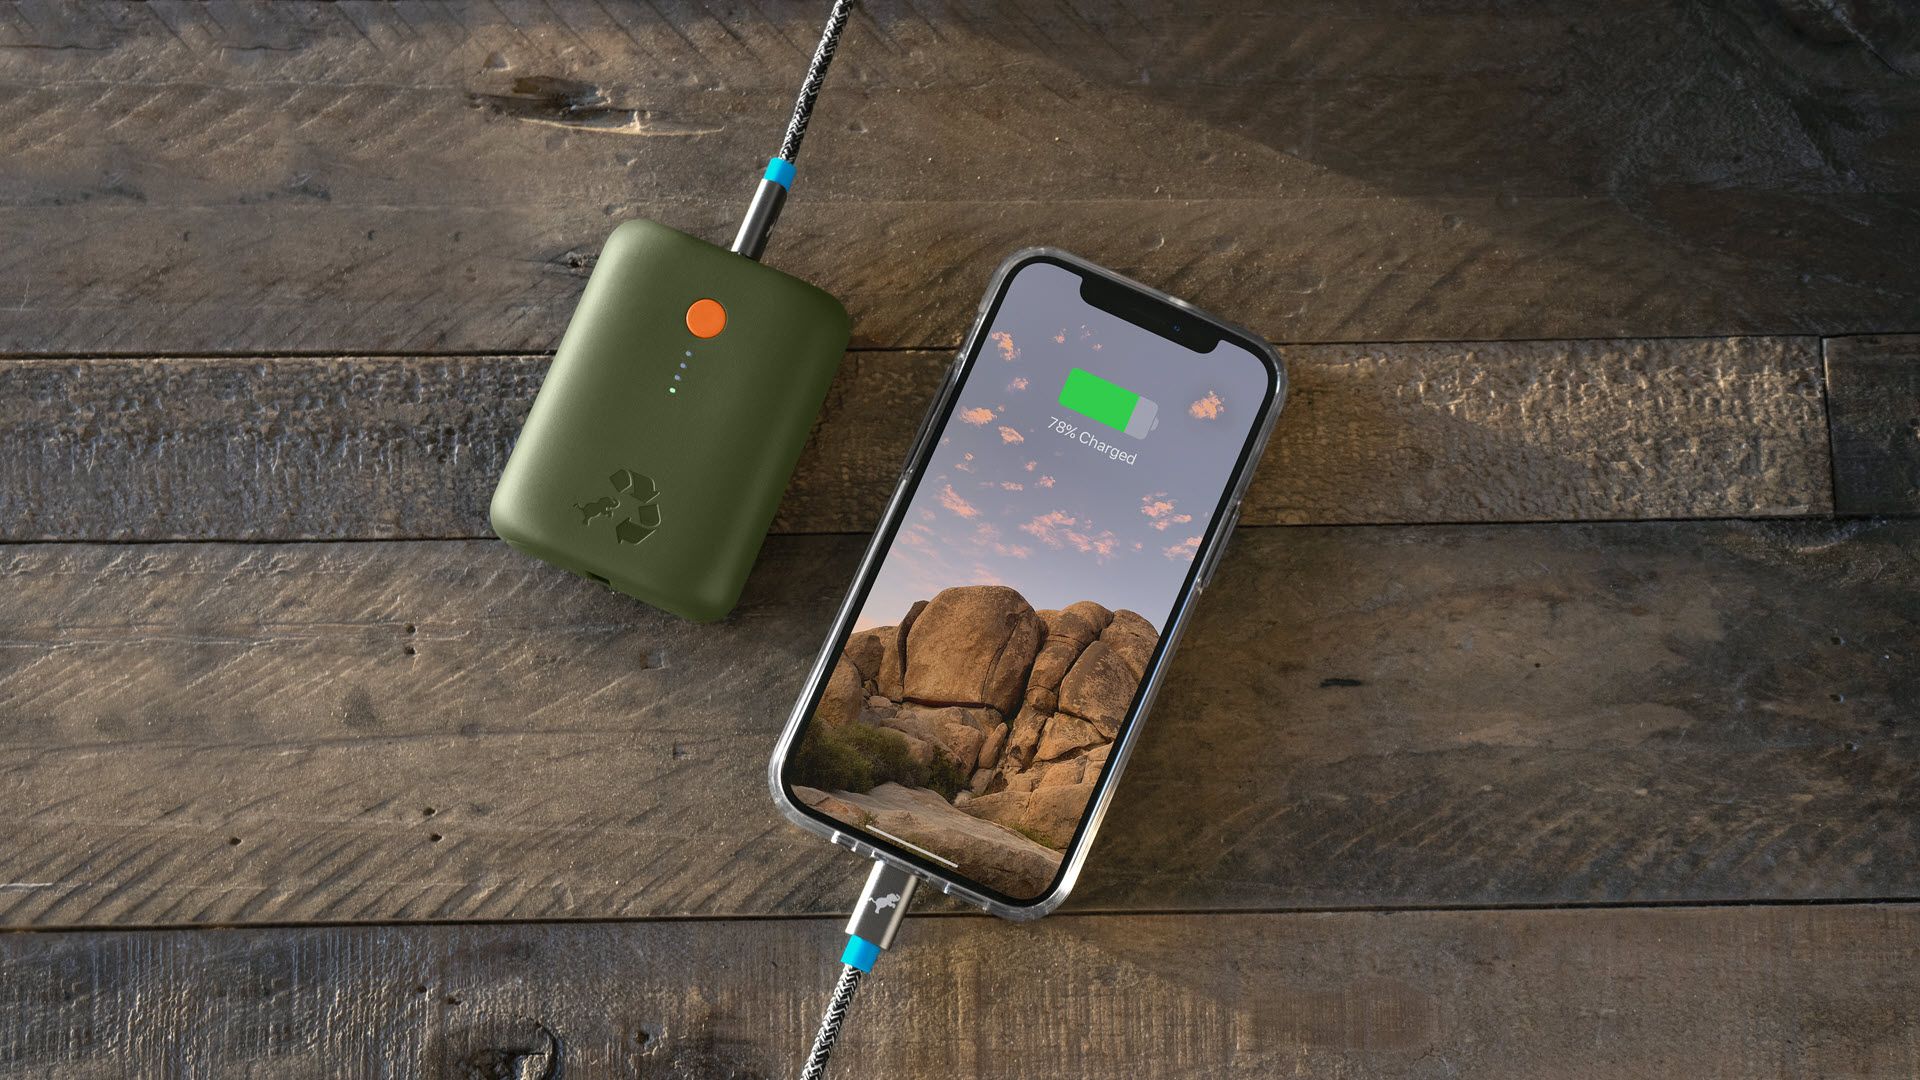 A Champ power bank plugged into an iPhone